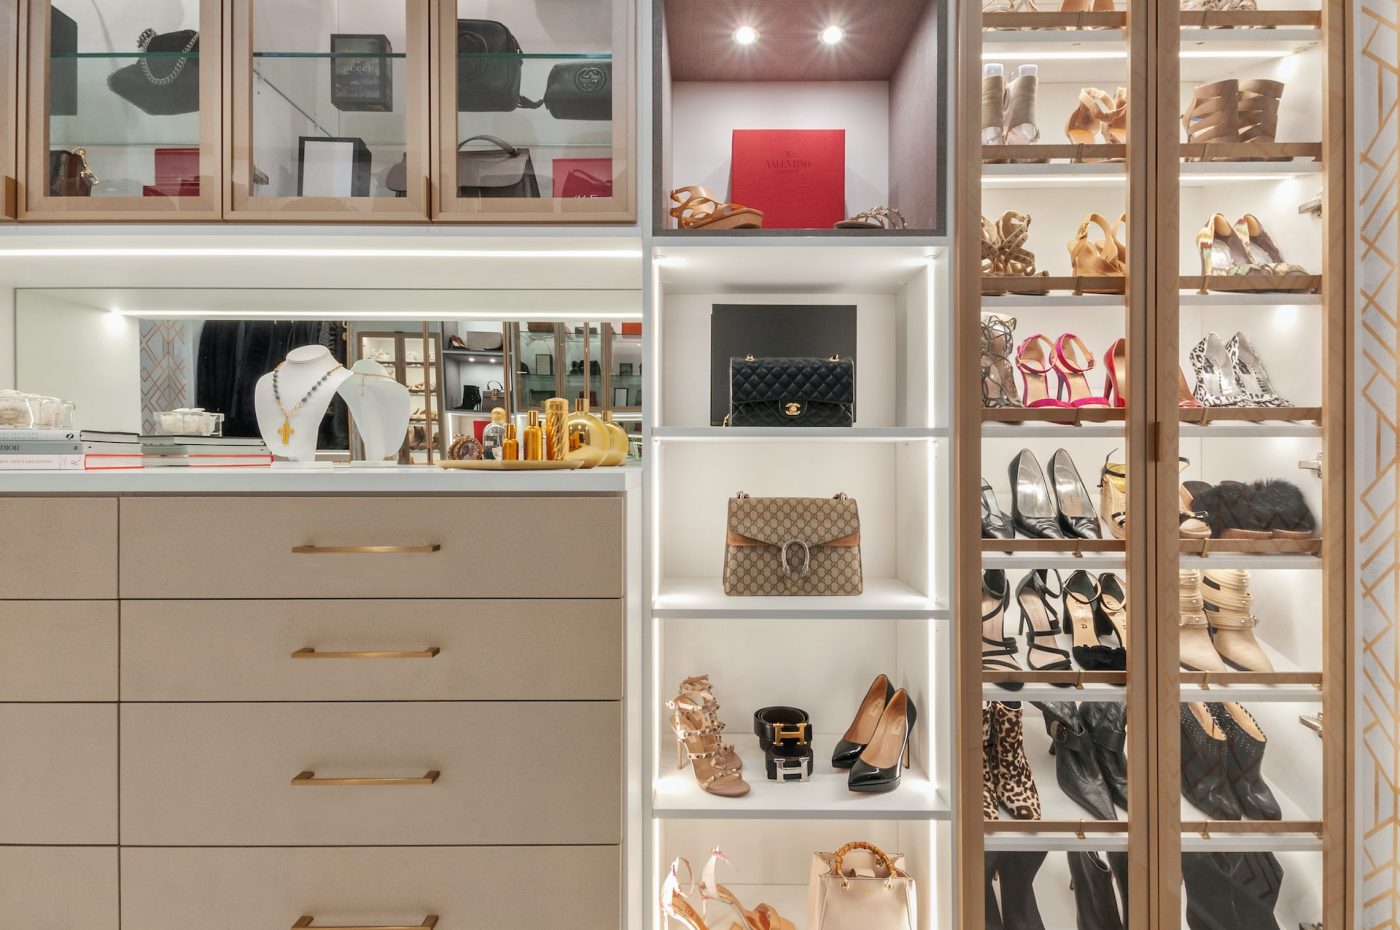 A walk-in closet with different shoes and bags on display.